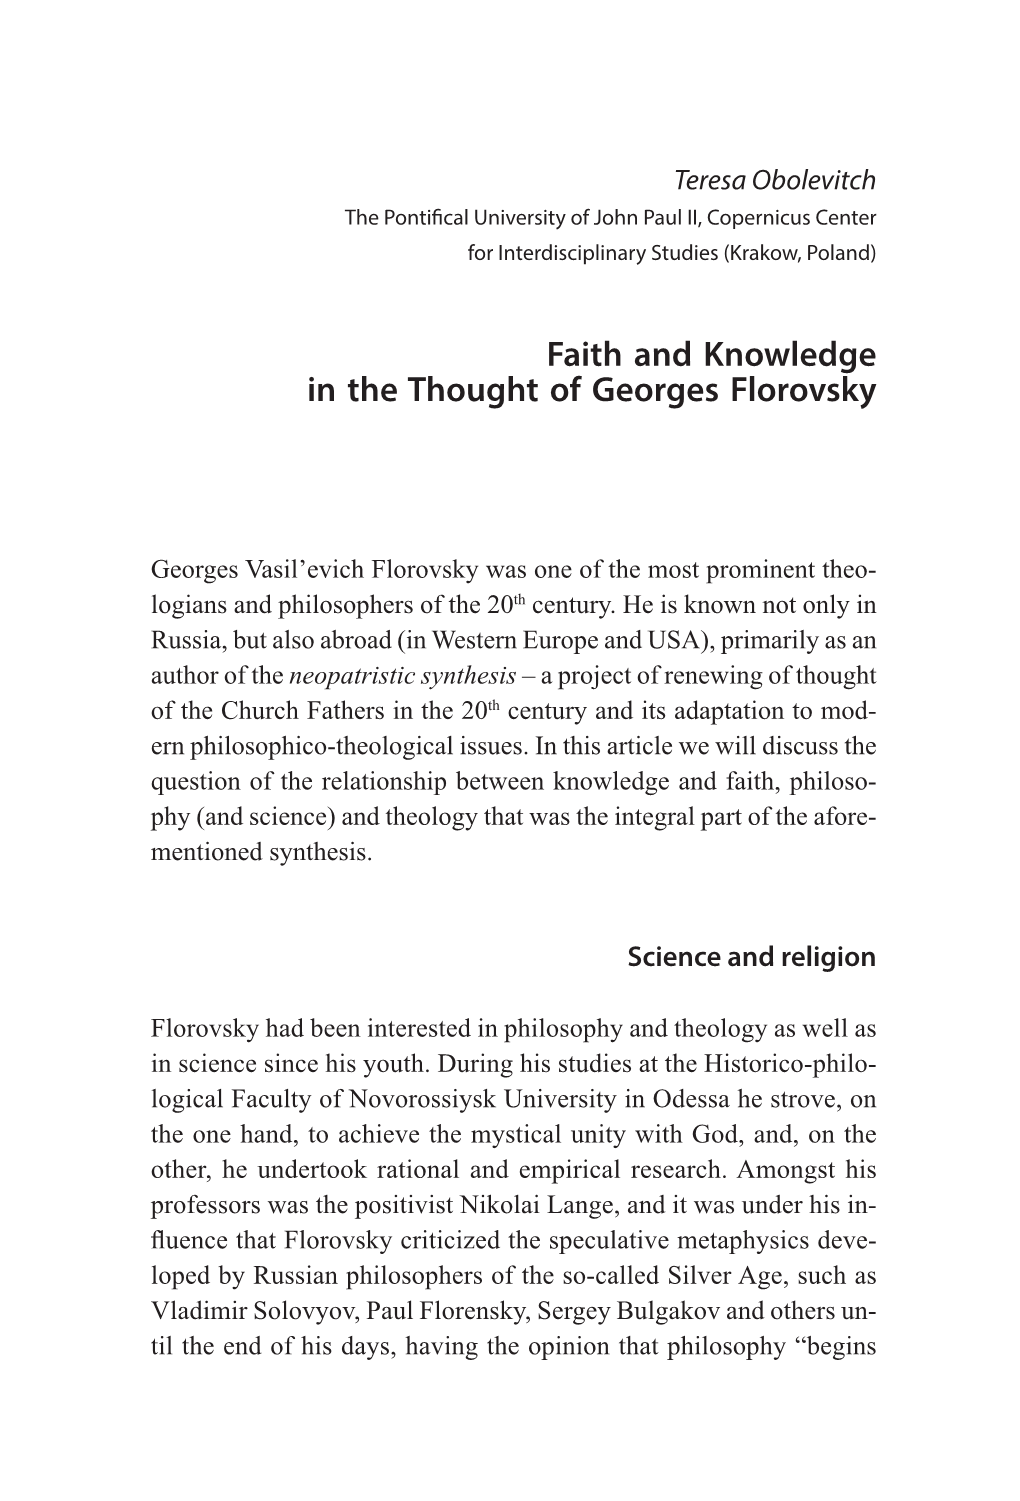 Faith and Knowledge in the Thought of Georges Florovsky